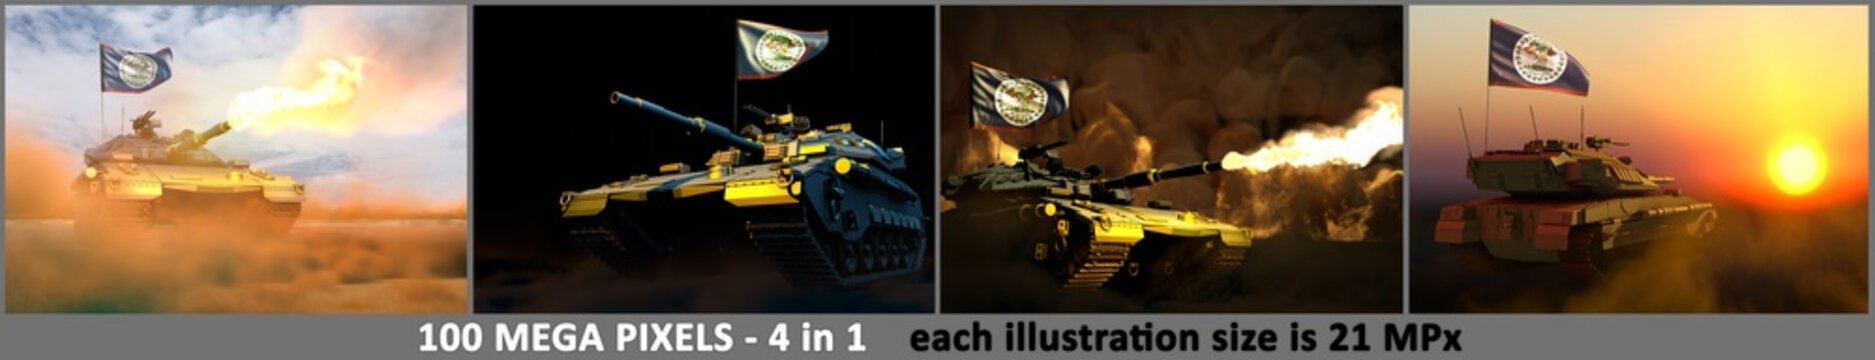 Belize army concept - 4 detailed images of tank with fictional design with Belize flag and free place for your text, military 3D Illustration